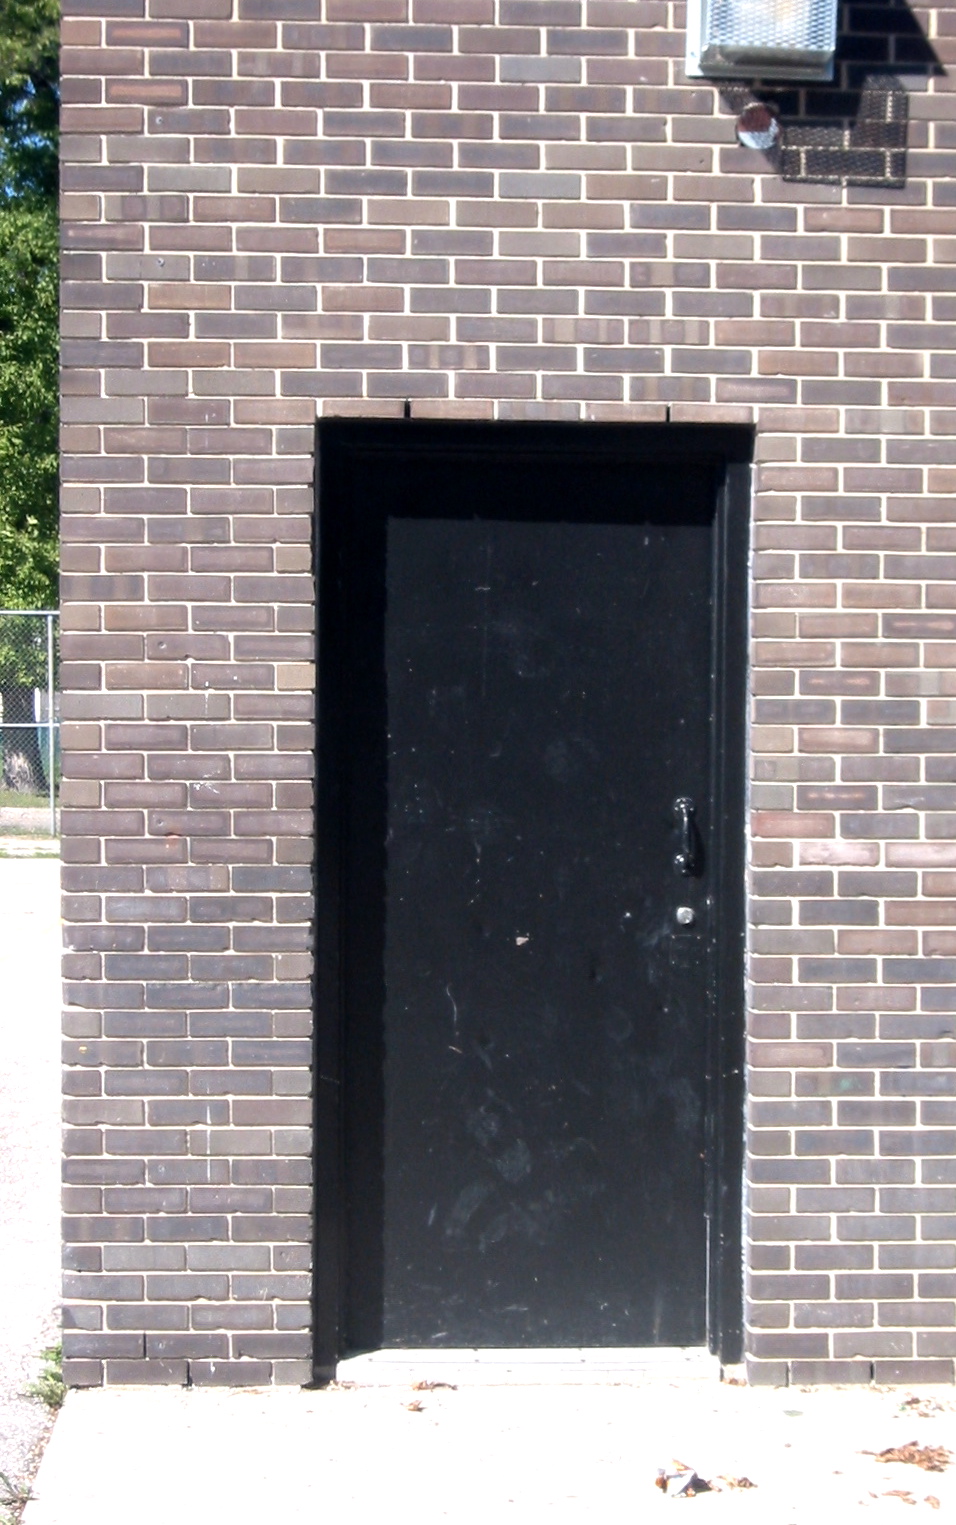 the doorway to a building is closed to let in light